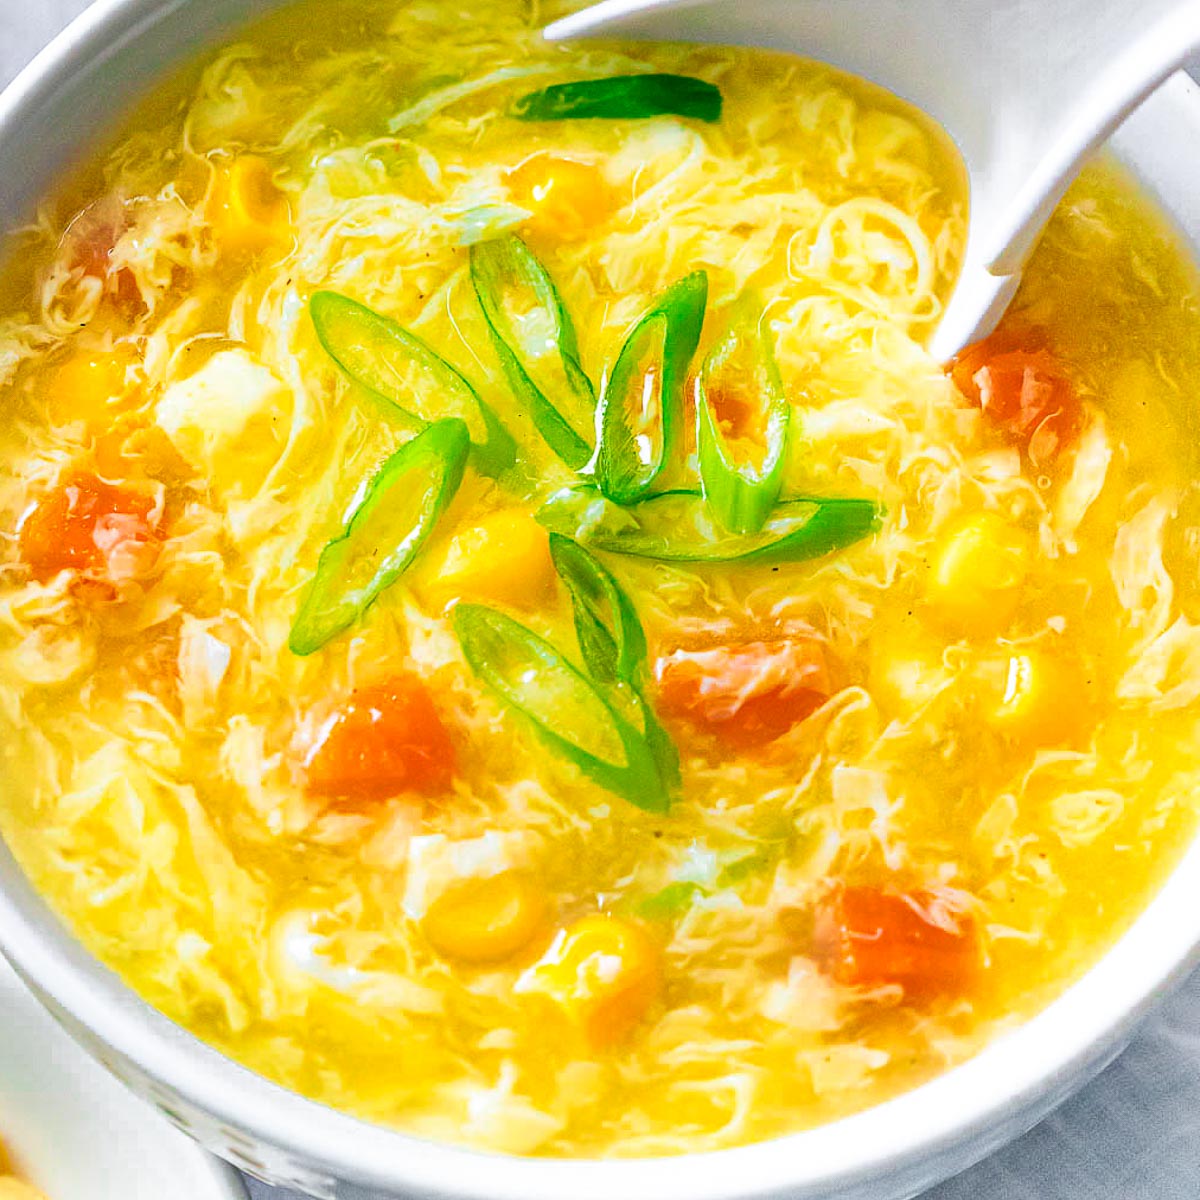 Bowl of restaurant style egg drop soup with corn, carrots, and egg flower ribbons with a soup spoon.